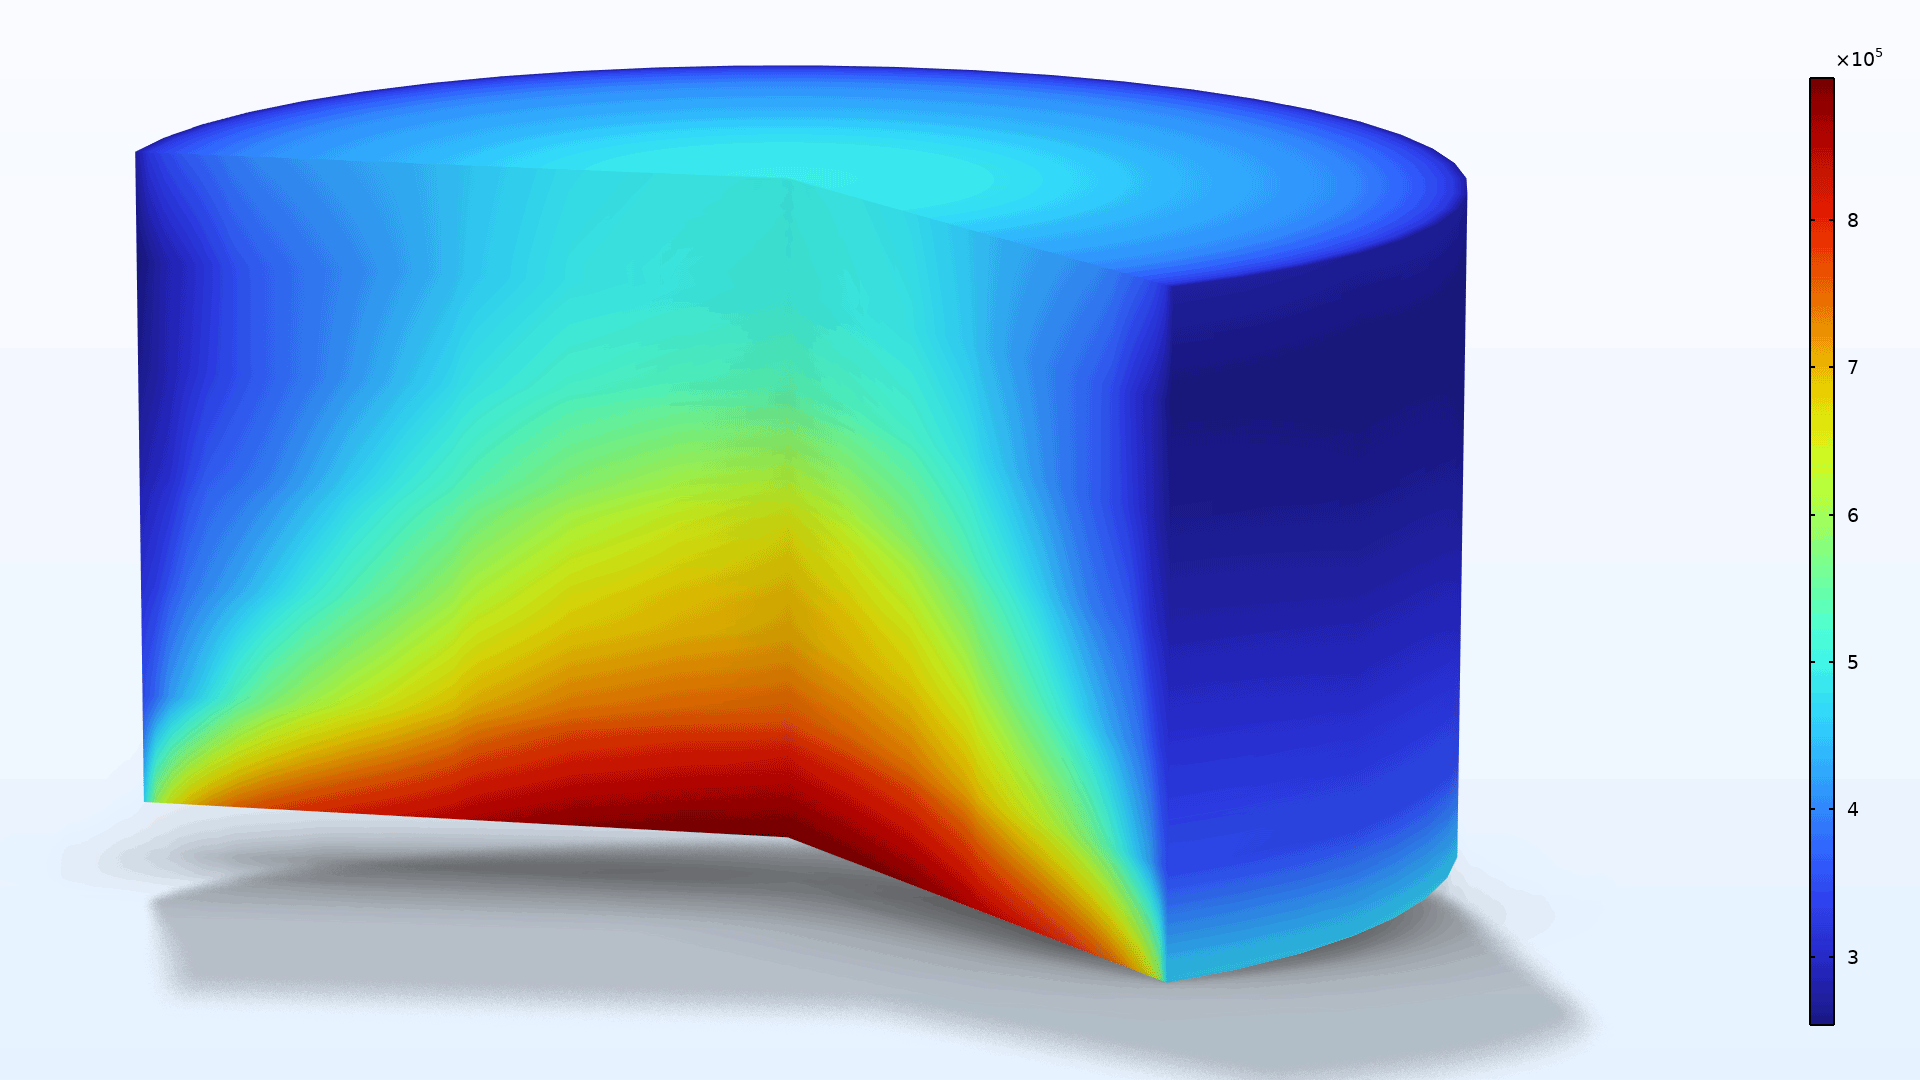 The second cylindrical furnace benchmark model showing the isotropic scattering in the Rainbow color table.